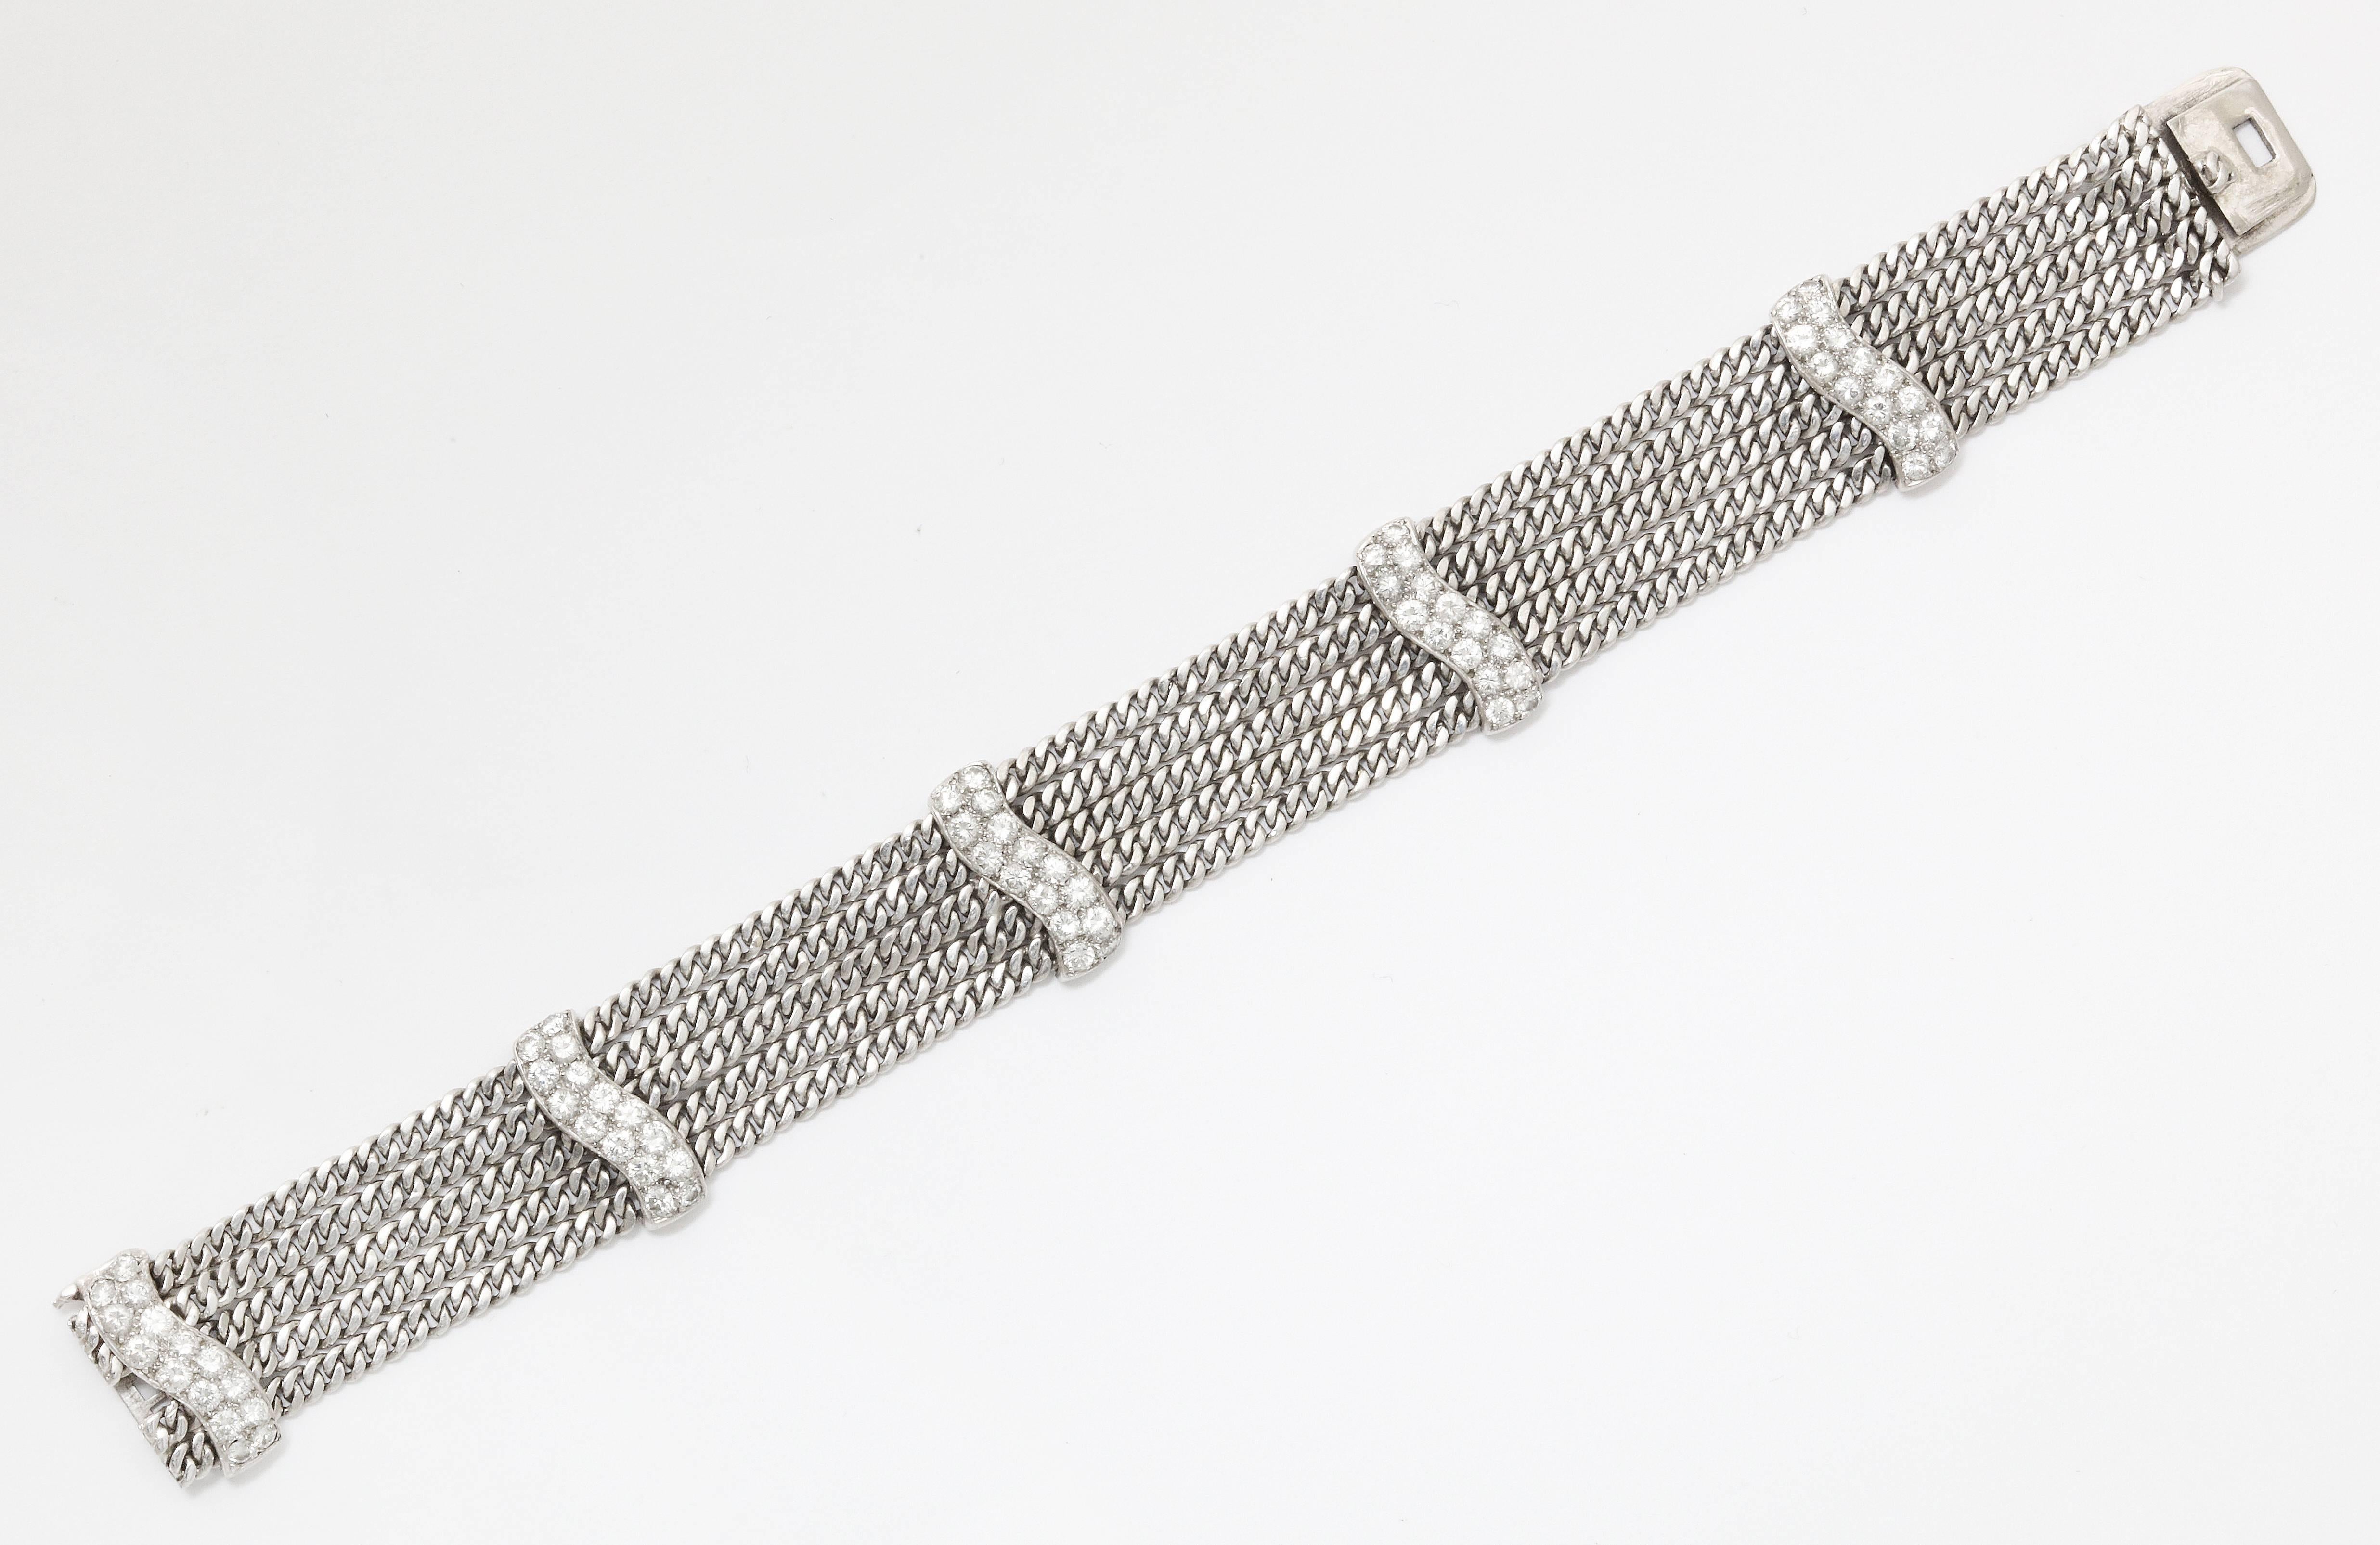 The beauty, and strength, of platinum shines through in this bold design.  Five curb link platinum chains are connected by pave set diamond (total weight app. 1.80cts) bars.  The subtle curves at the ends of the bars add just the right touch of